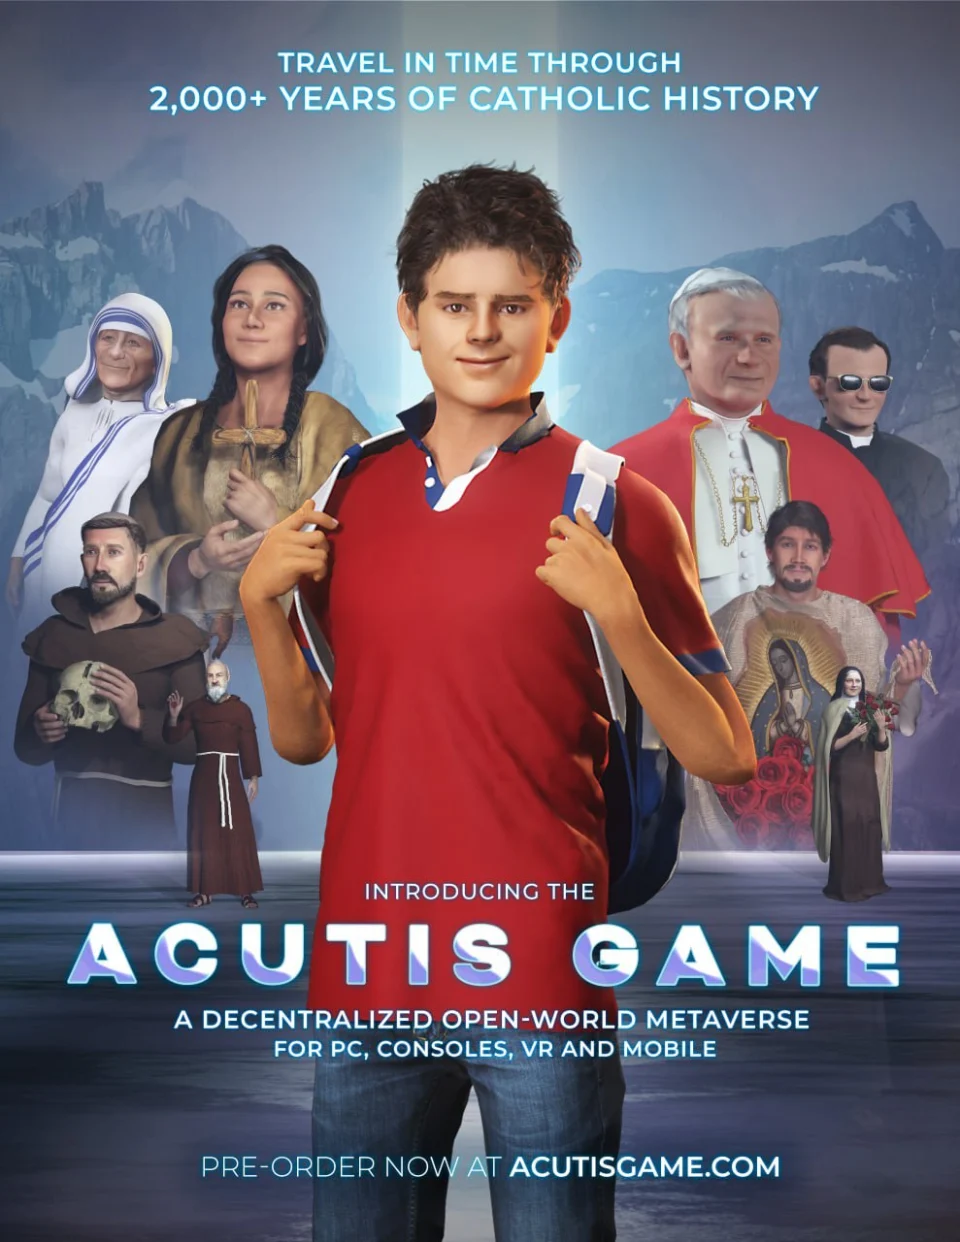 Faith Games Launches Acutis Game™ and Virtual Reality Experiences as Part of its Catholic Metaverse